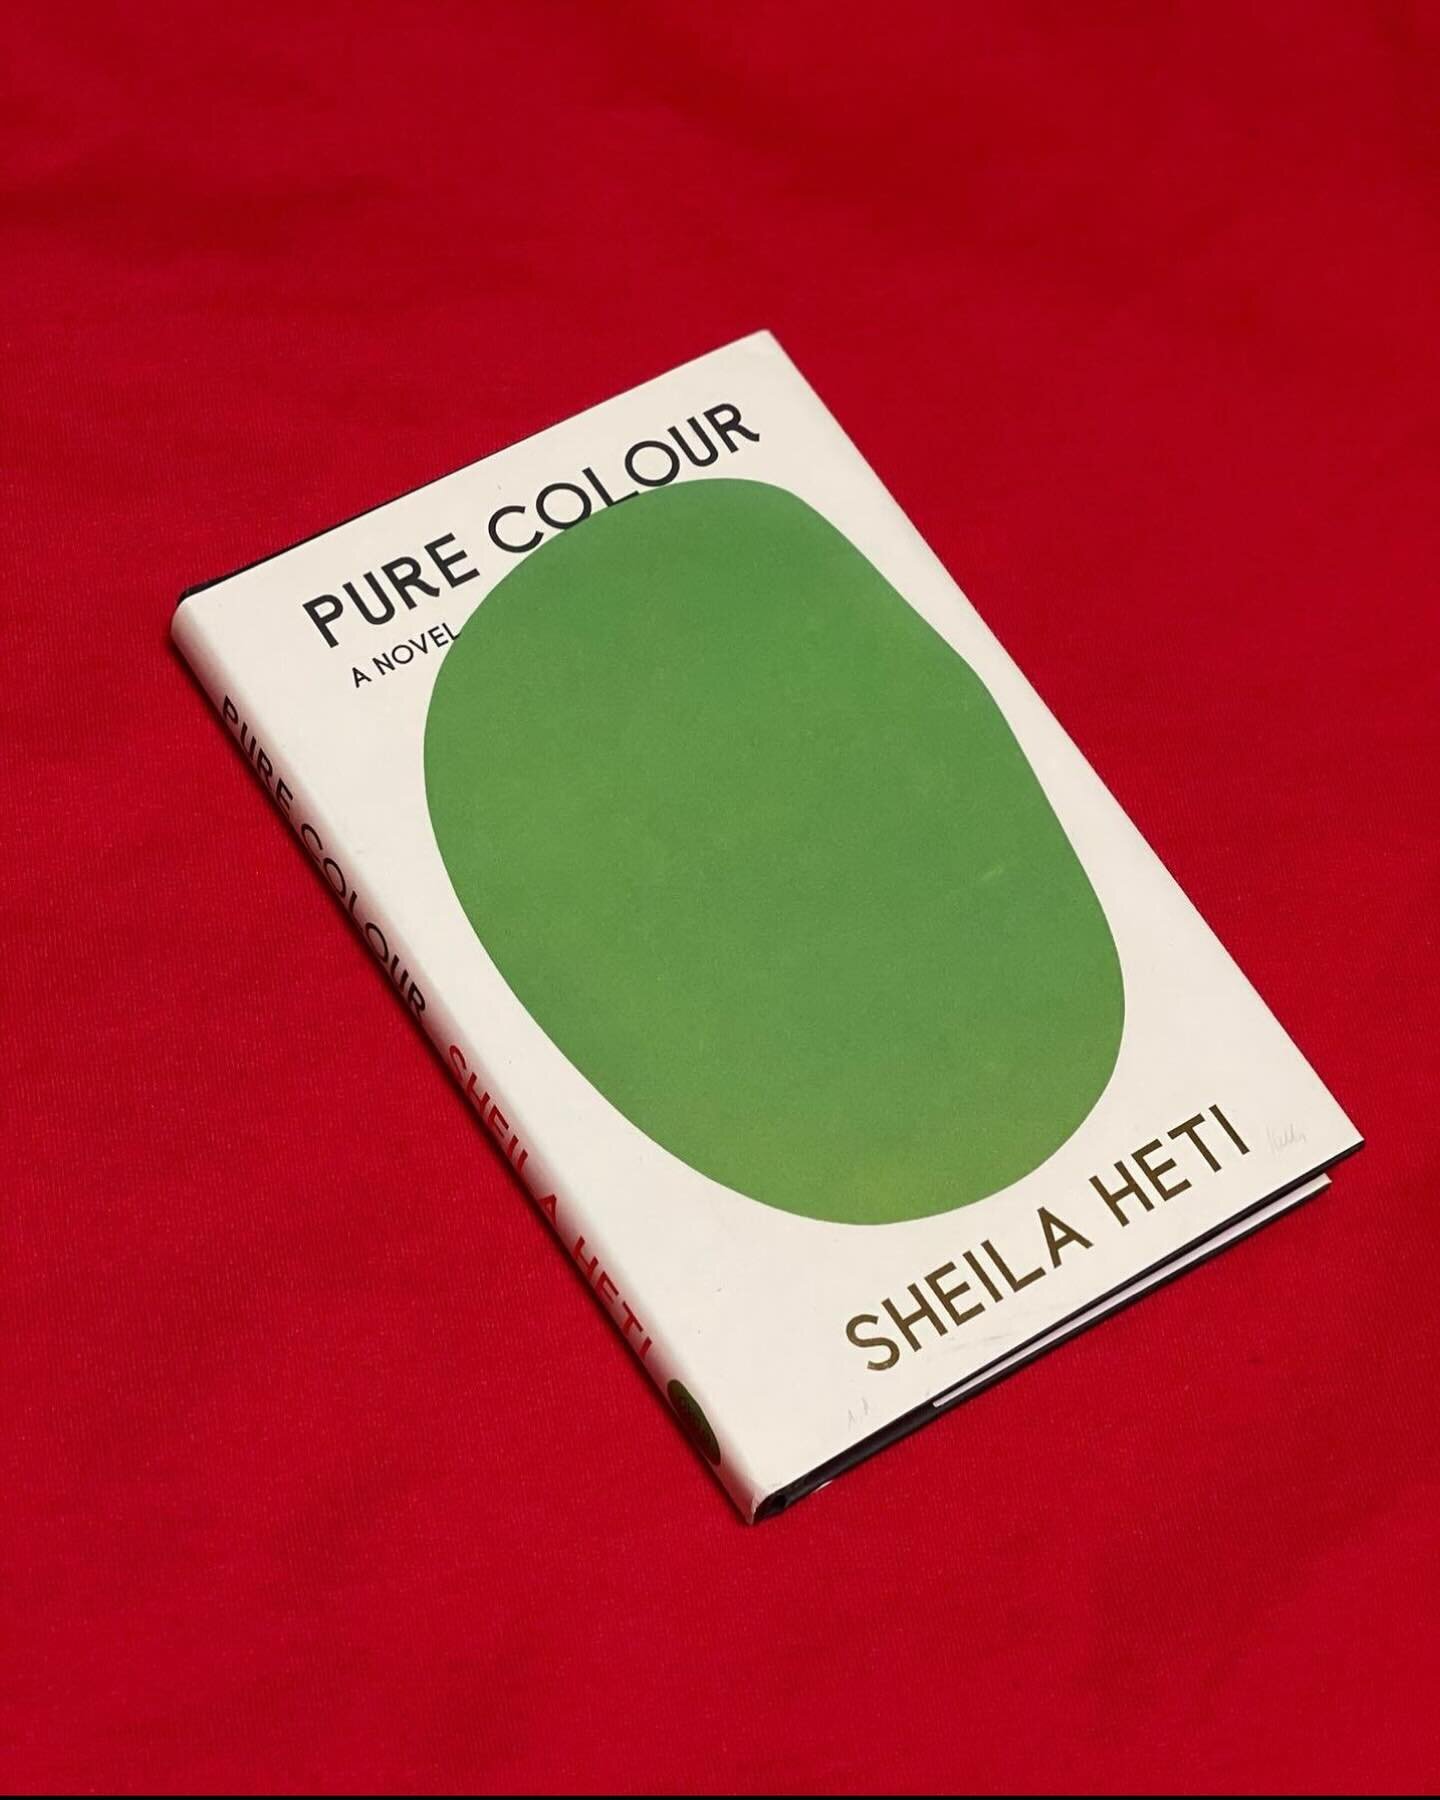 Sheila Heti, Pure Color (2022).
:
Uhhhhhhhhhhhhhhhhh... 😕🤔 okay.........
*SPOILERS*
The story revolves around Mira, her dad, and her crush Annie. I consider the novella to be divided into two parts, the first part till the death of Mira&rsquo;s dad